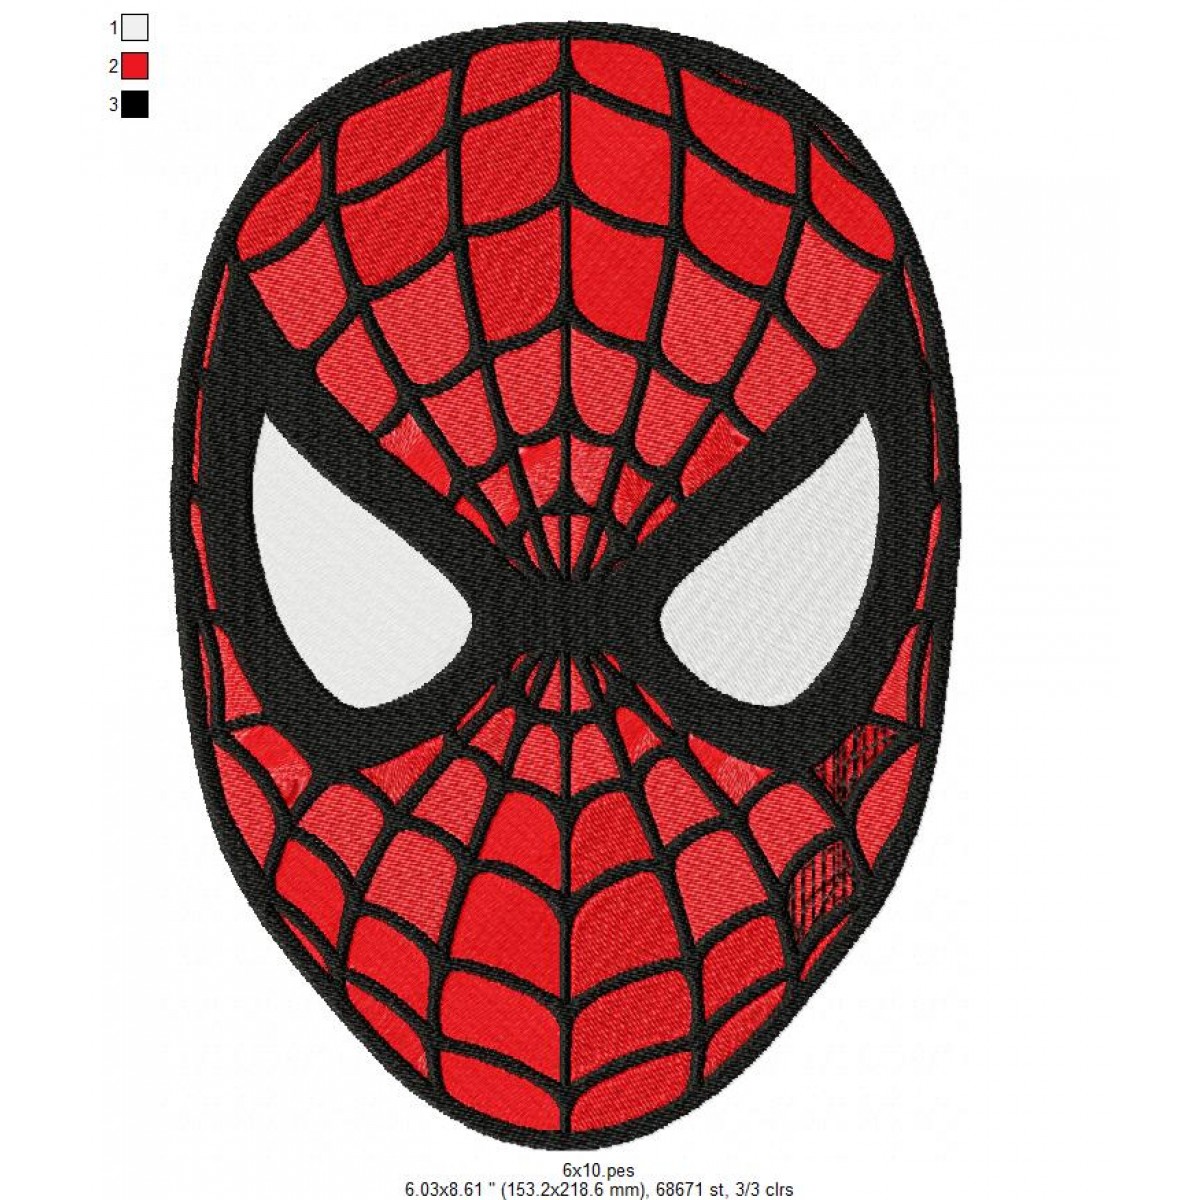 Spiderman Face Embroidery Design